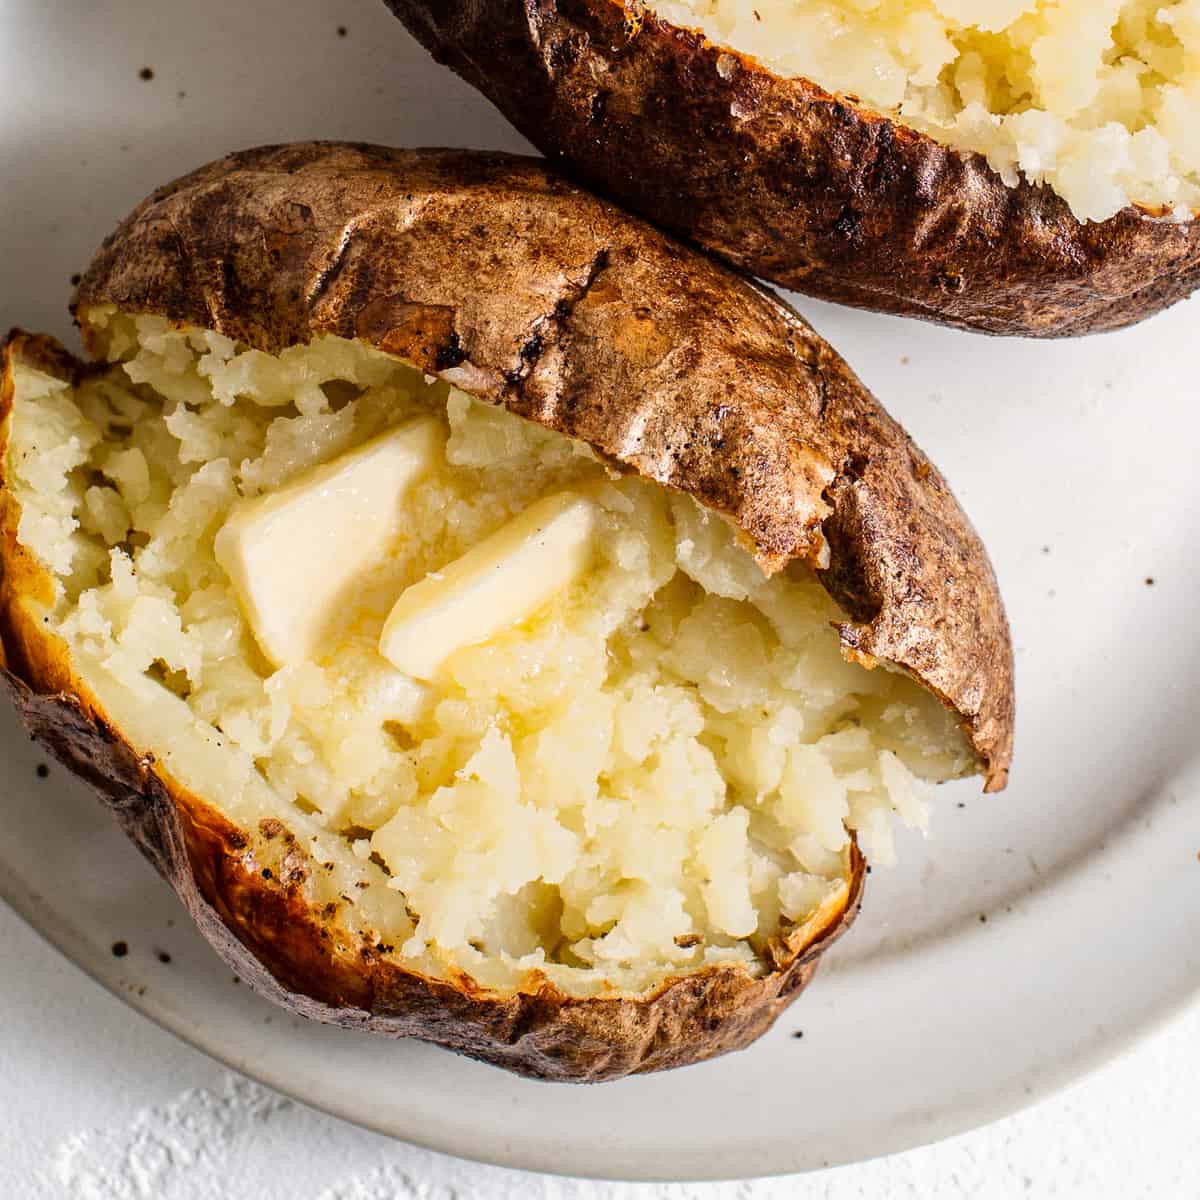 https://fitfoodiefinds.com/wp-content/uploads/2022/02/Air-Fryer-Baked-Potatoes-3-1.jpg